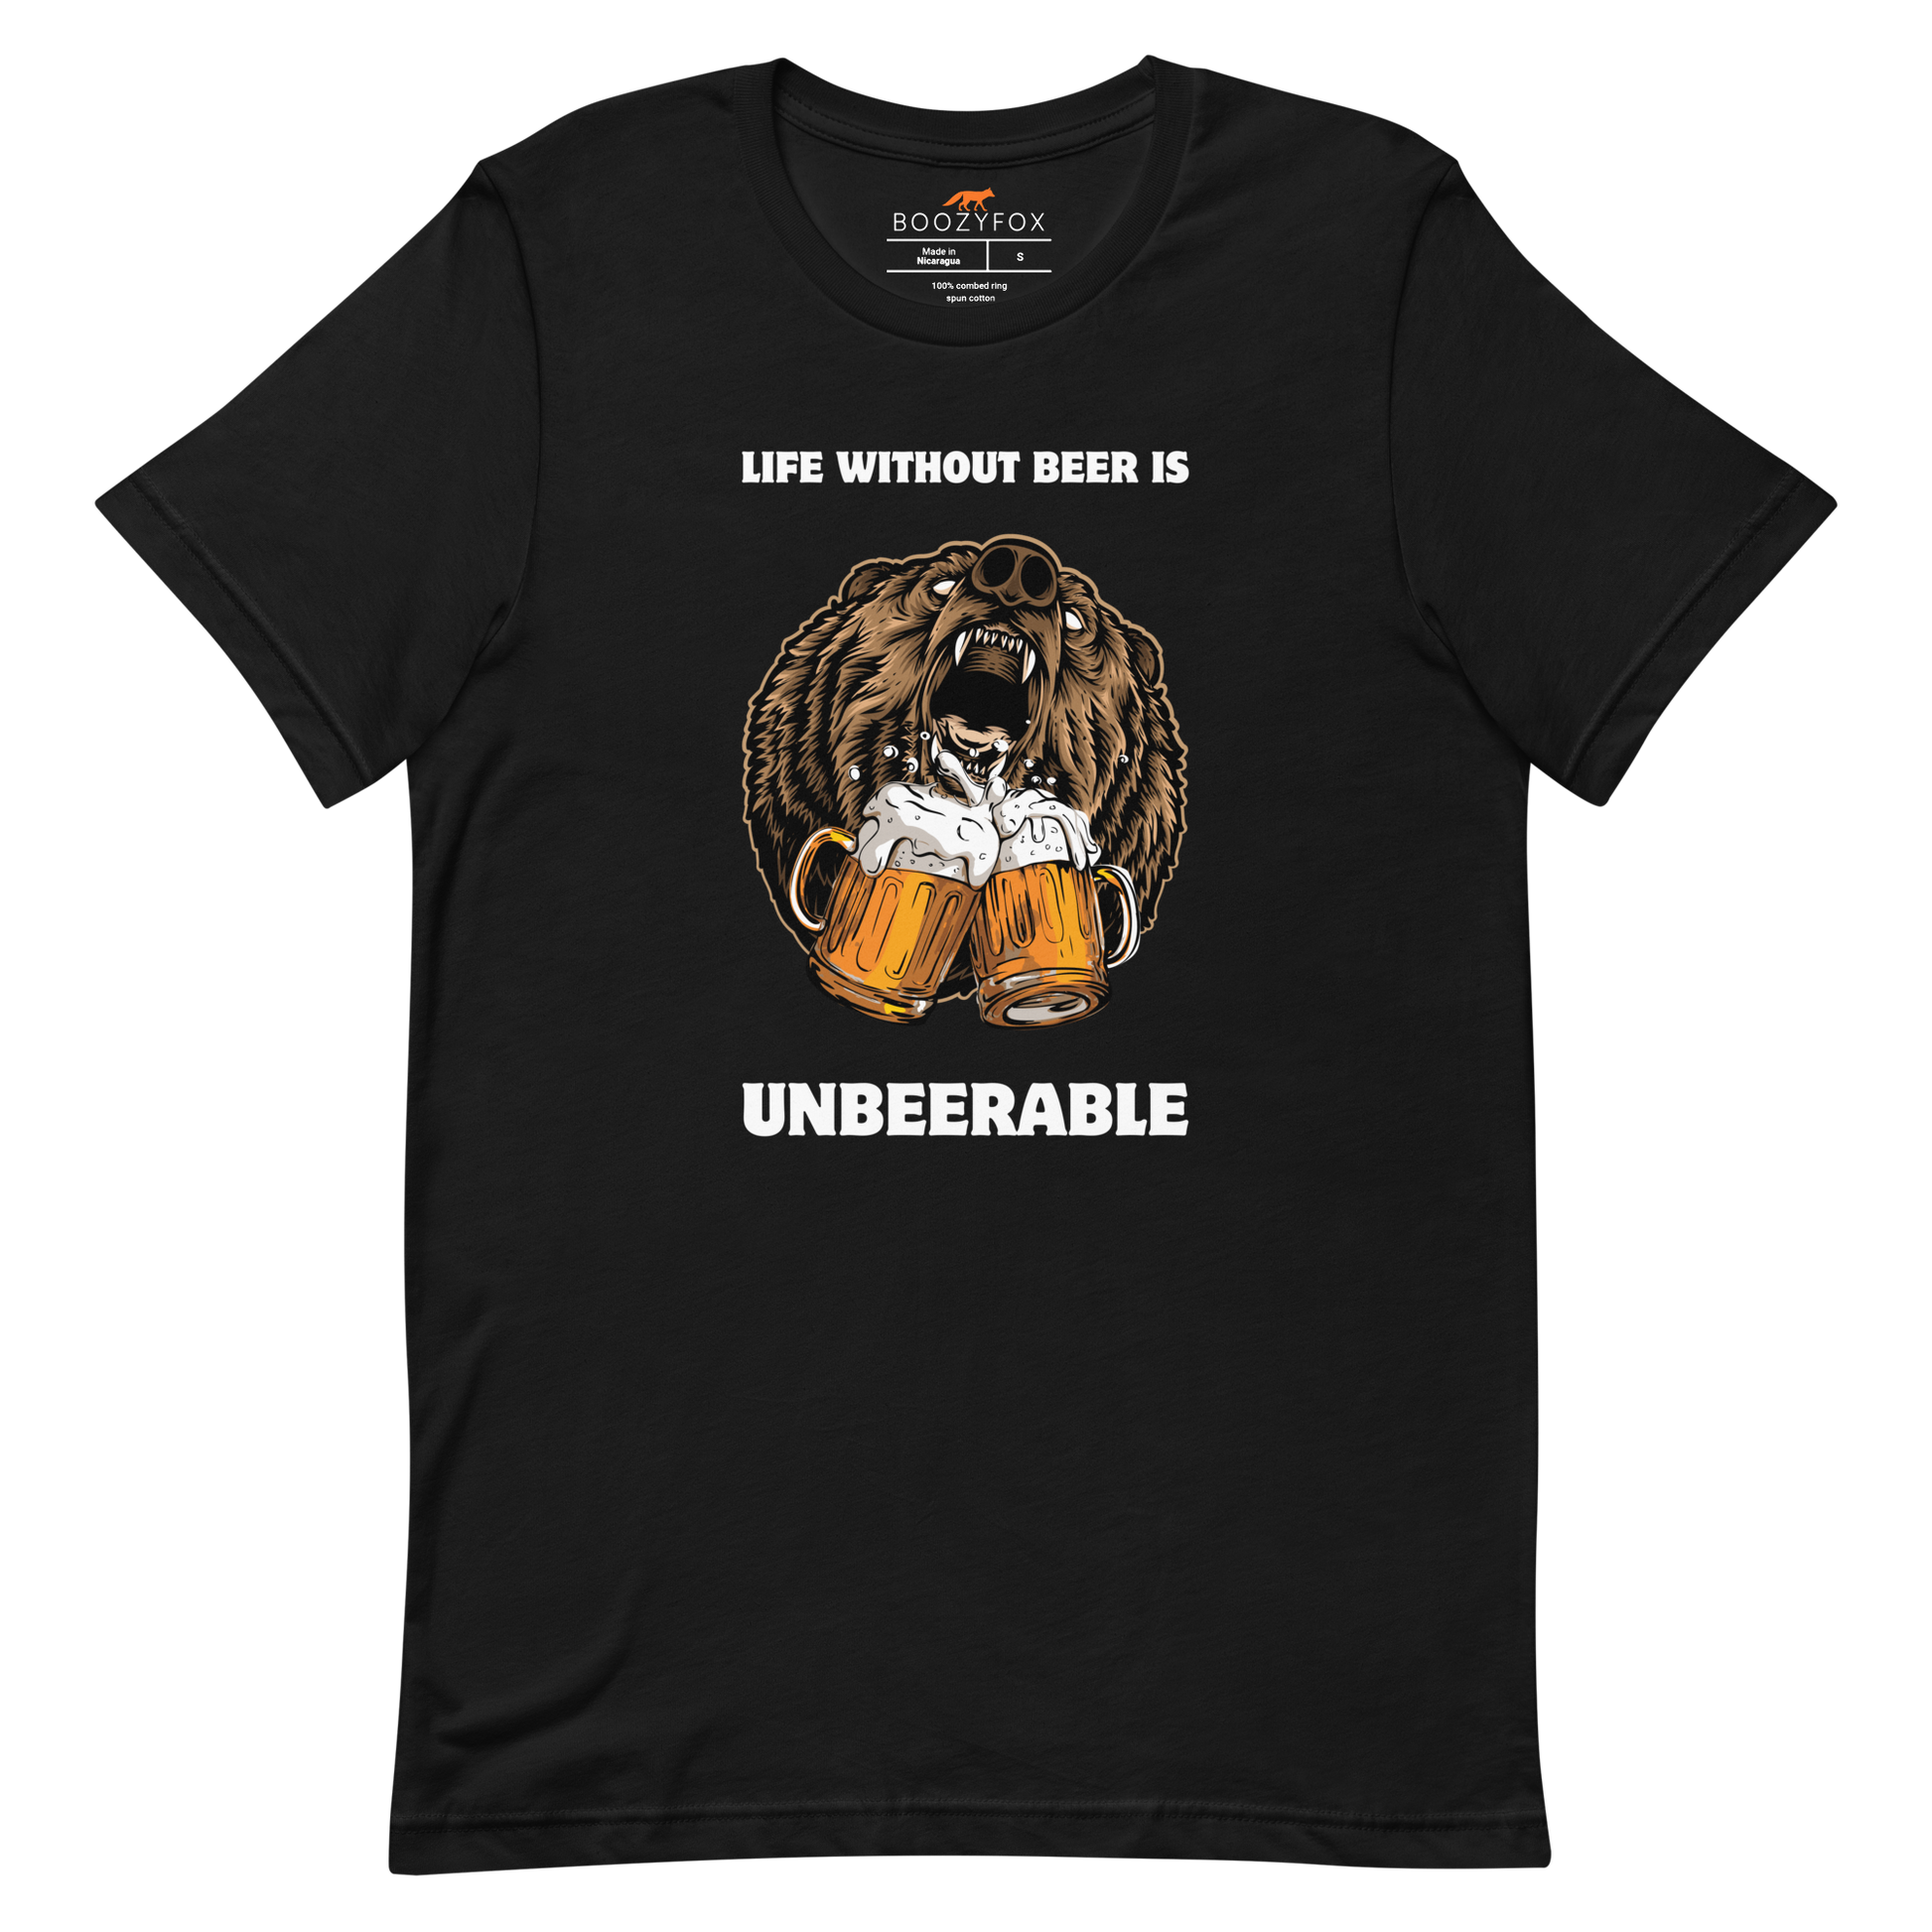 Black Premium Bear Tee featuring a Life Without Beer Is Unbeerable graphic design on the chest - Funny Graphic Bear Tees - Boozy Fox